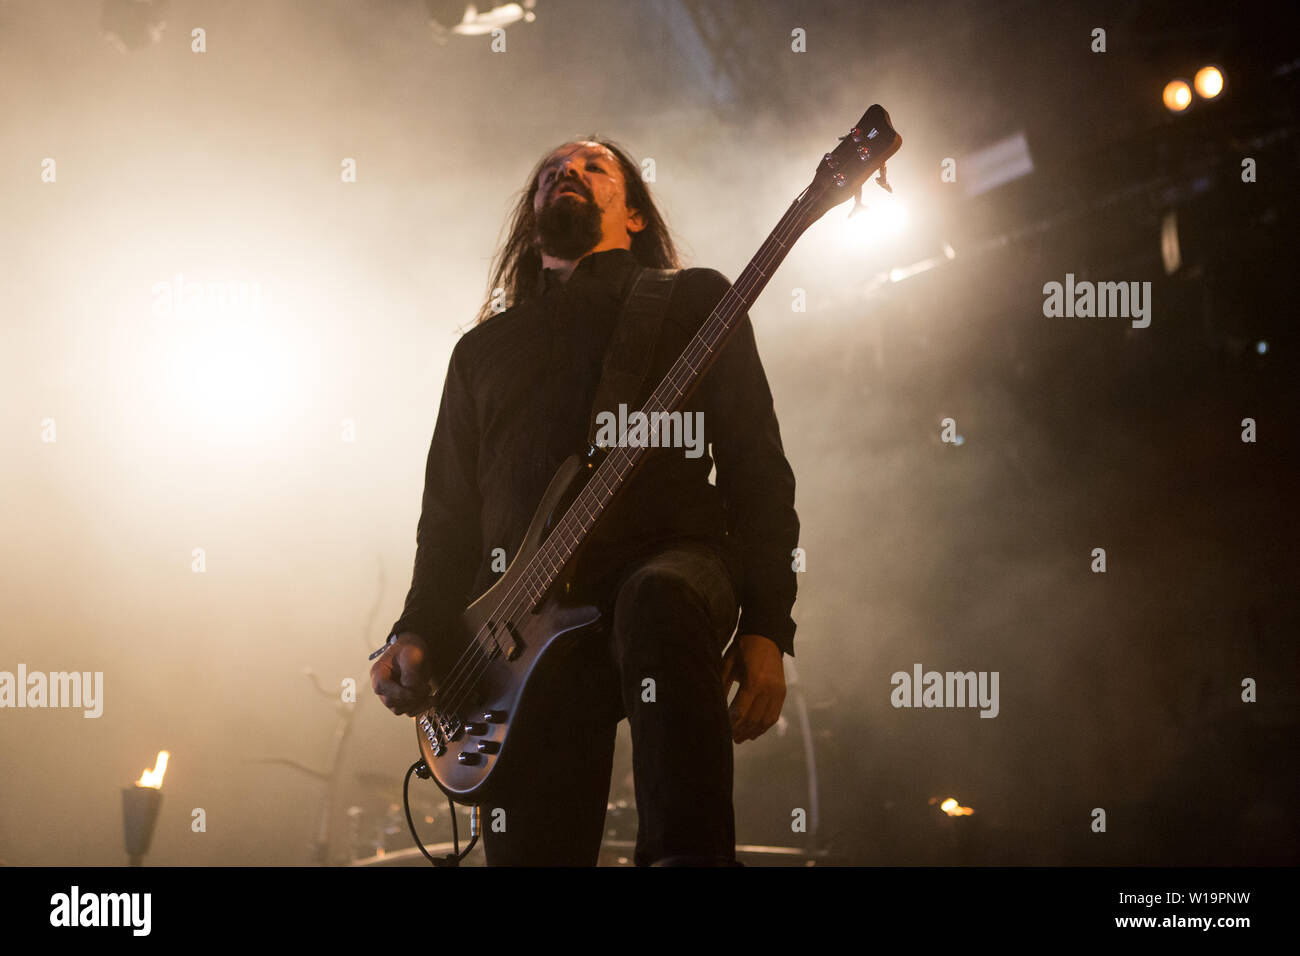 Oslo, Norway - June 27, 2019. The Norwegian black metal band Satyricon performs a live concert during the Norwegian music festival Tons of Rock 2019 in Oslo. Here bass player Anders Odden is seen live on stage. (Photo credit: Gonzales Photo - Per-Otto Oppi). Stock Photo